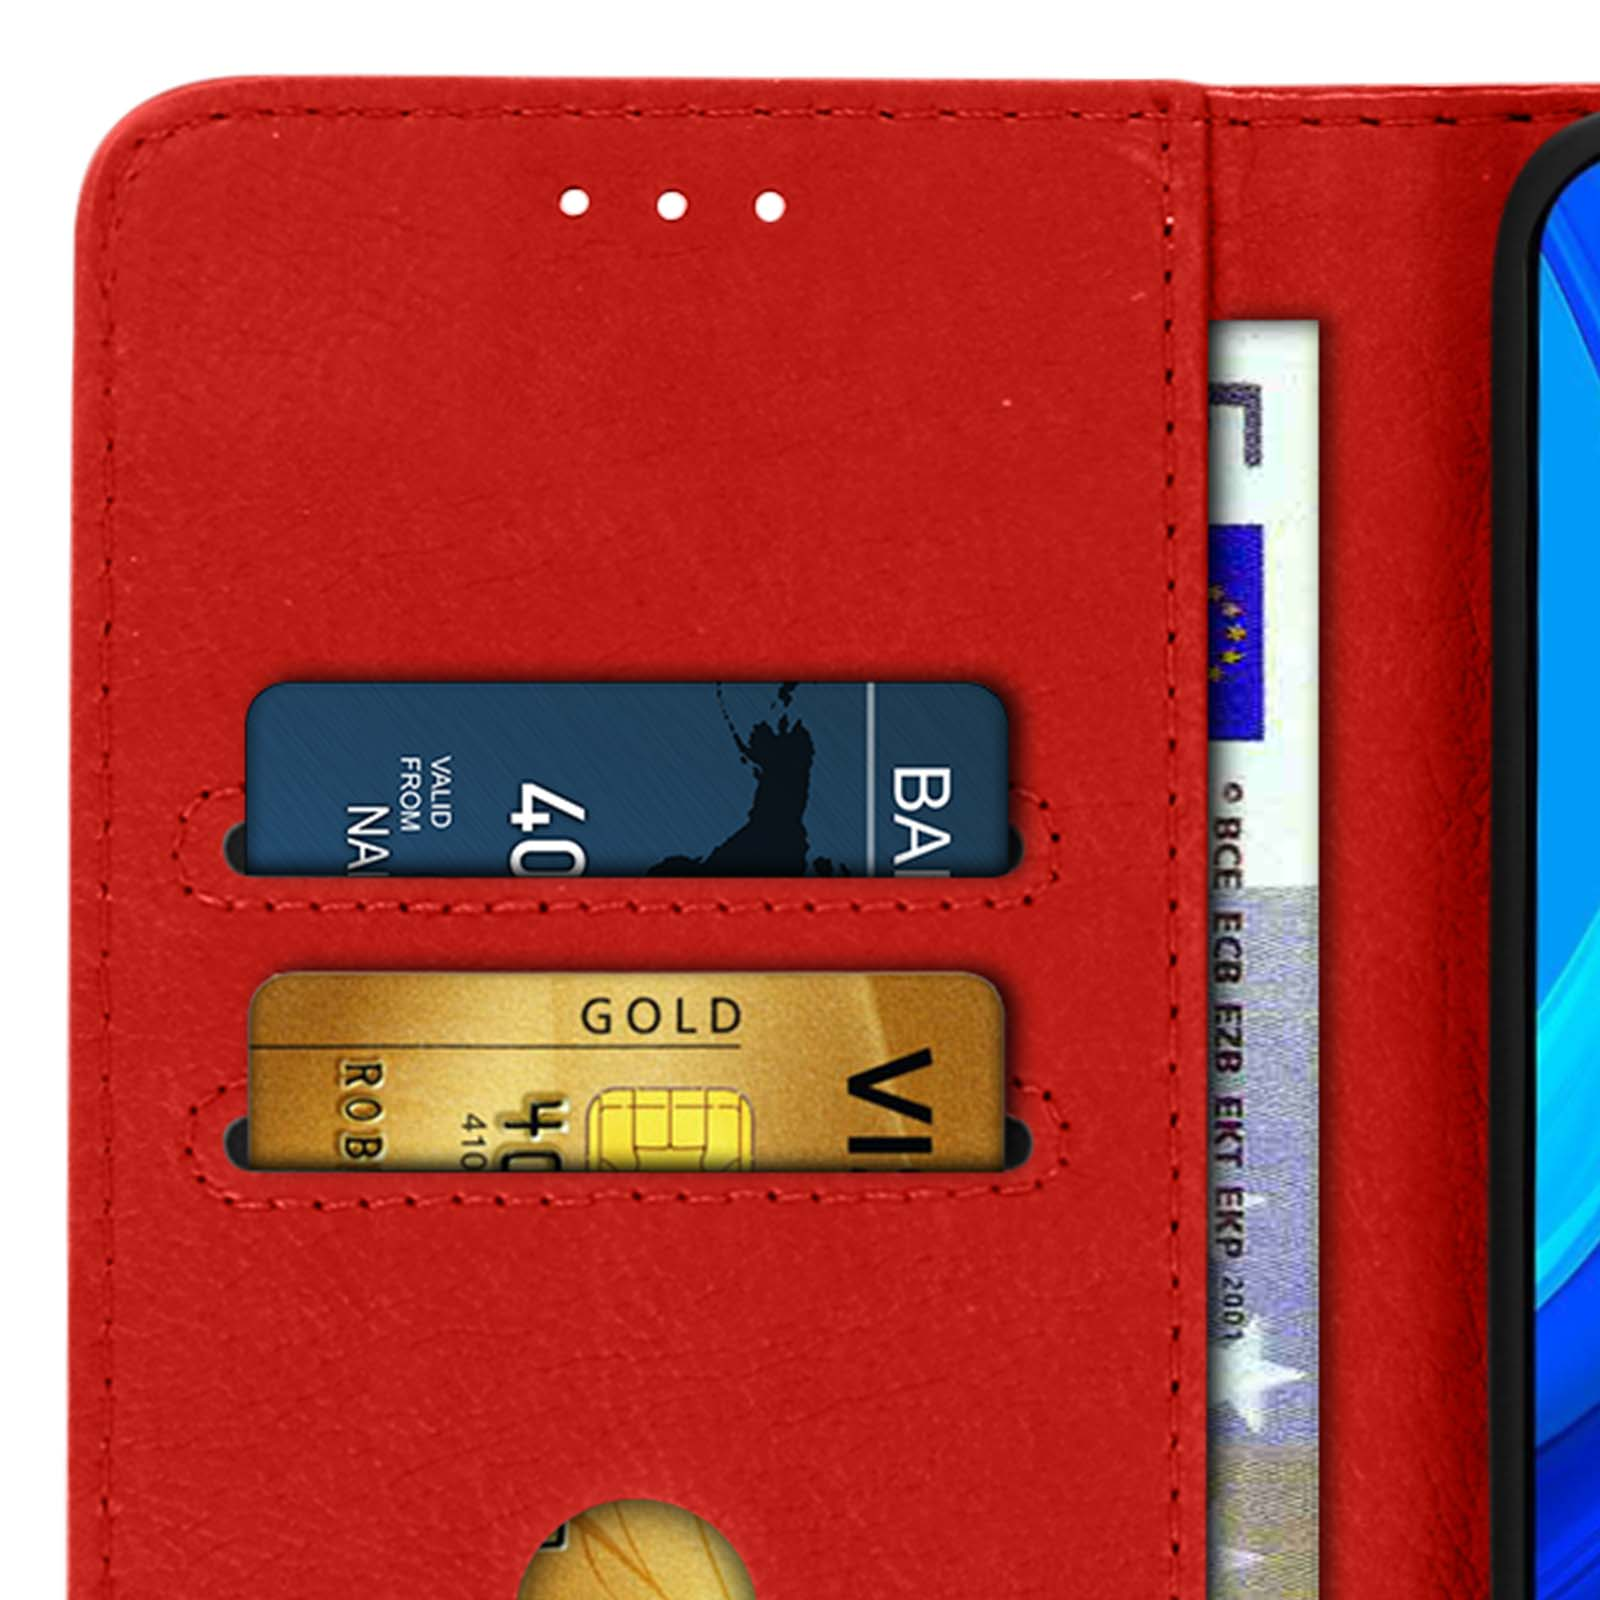 Series, P AVIZAR Rot smart 2020, Huawei, Chesterfield Bookcover,